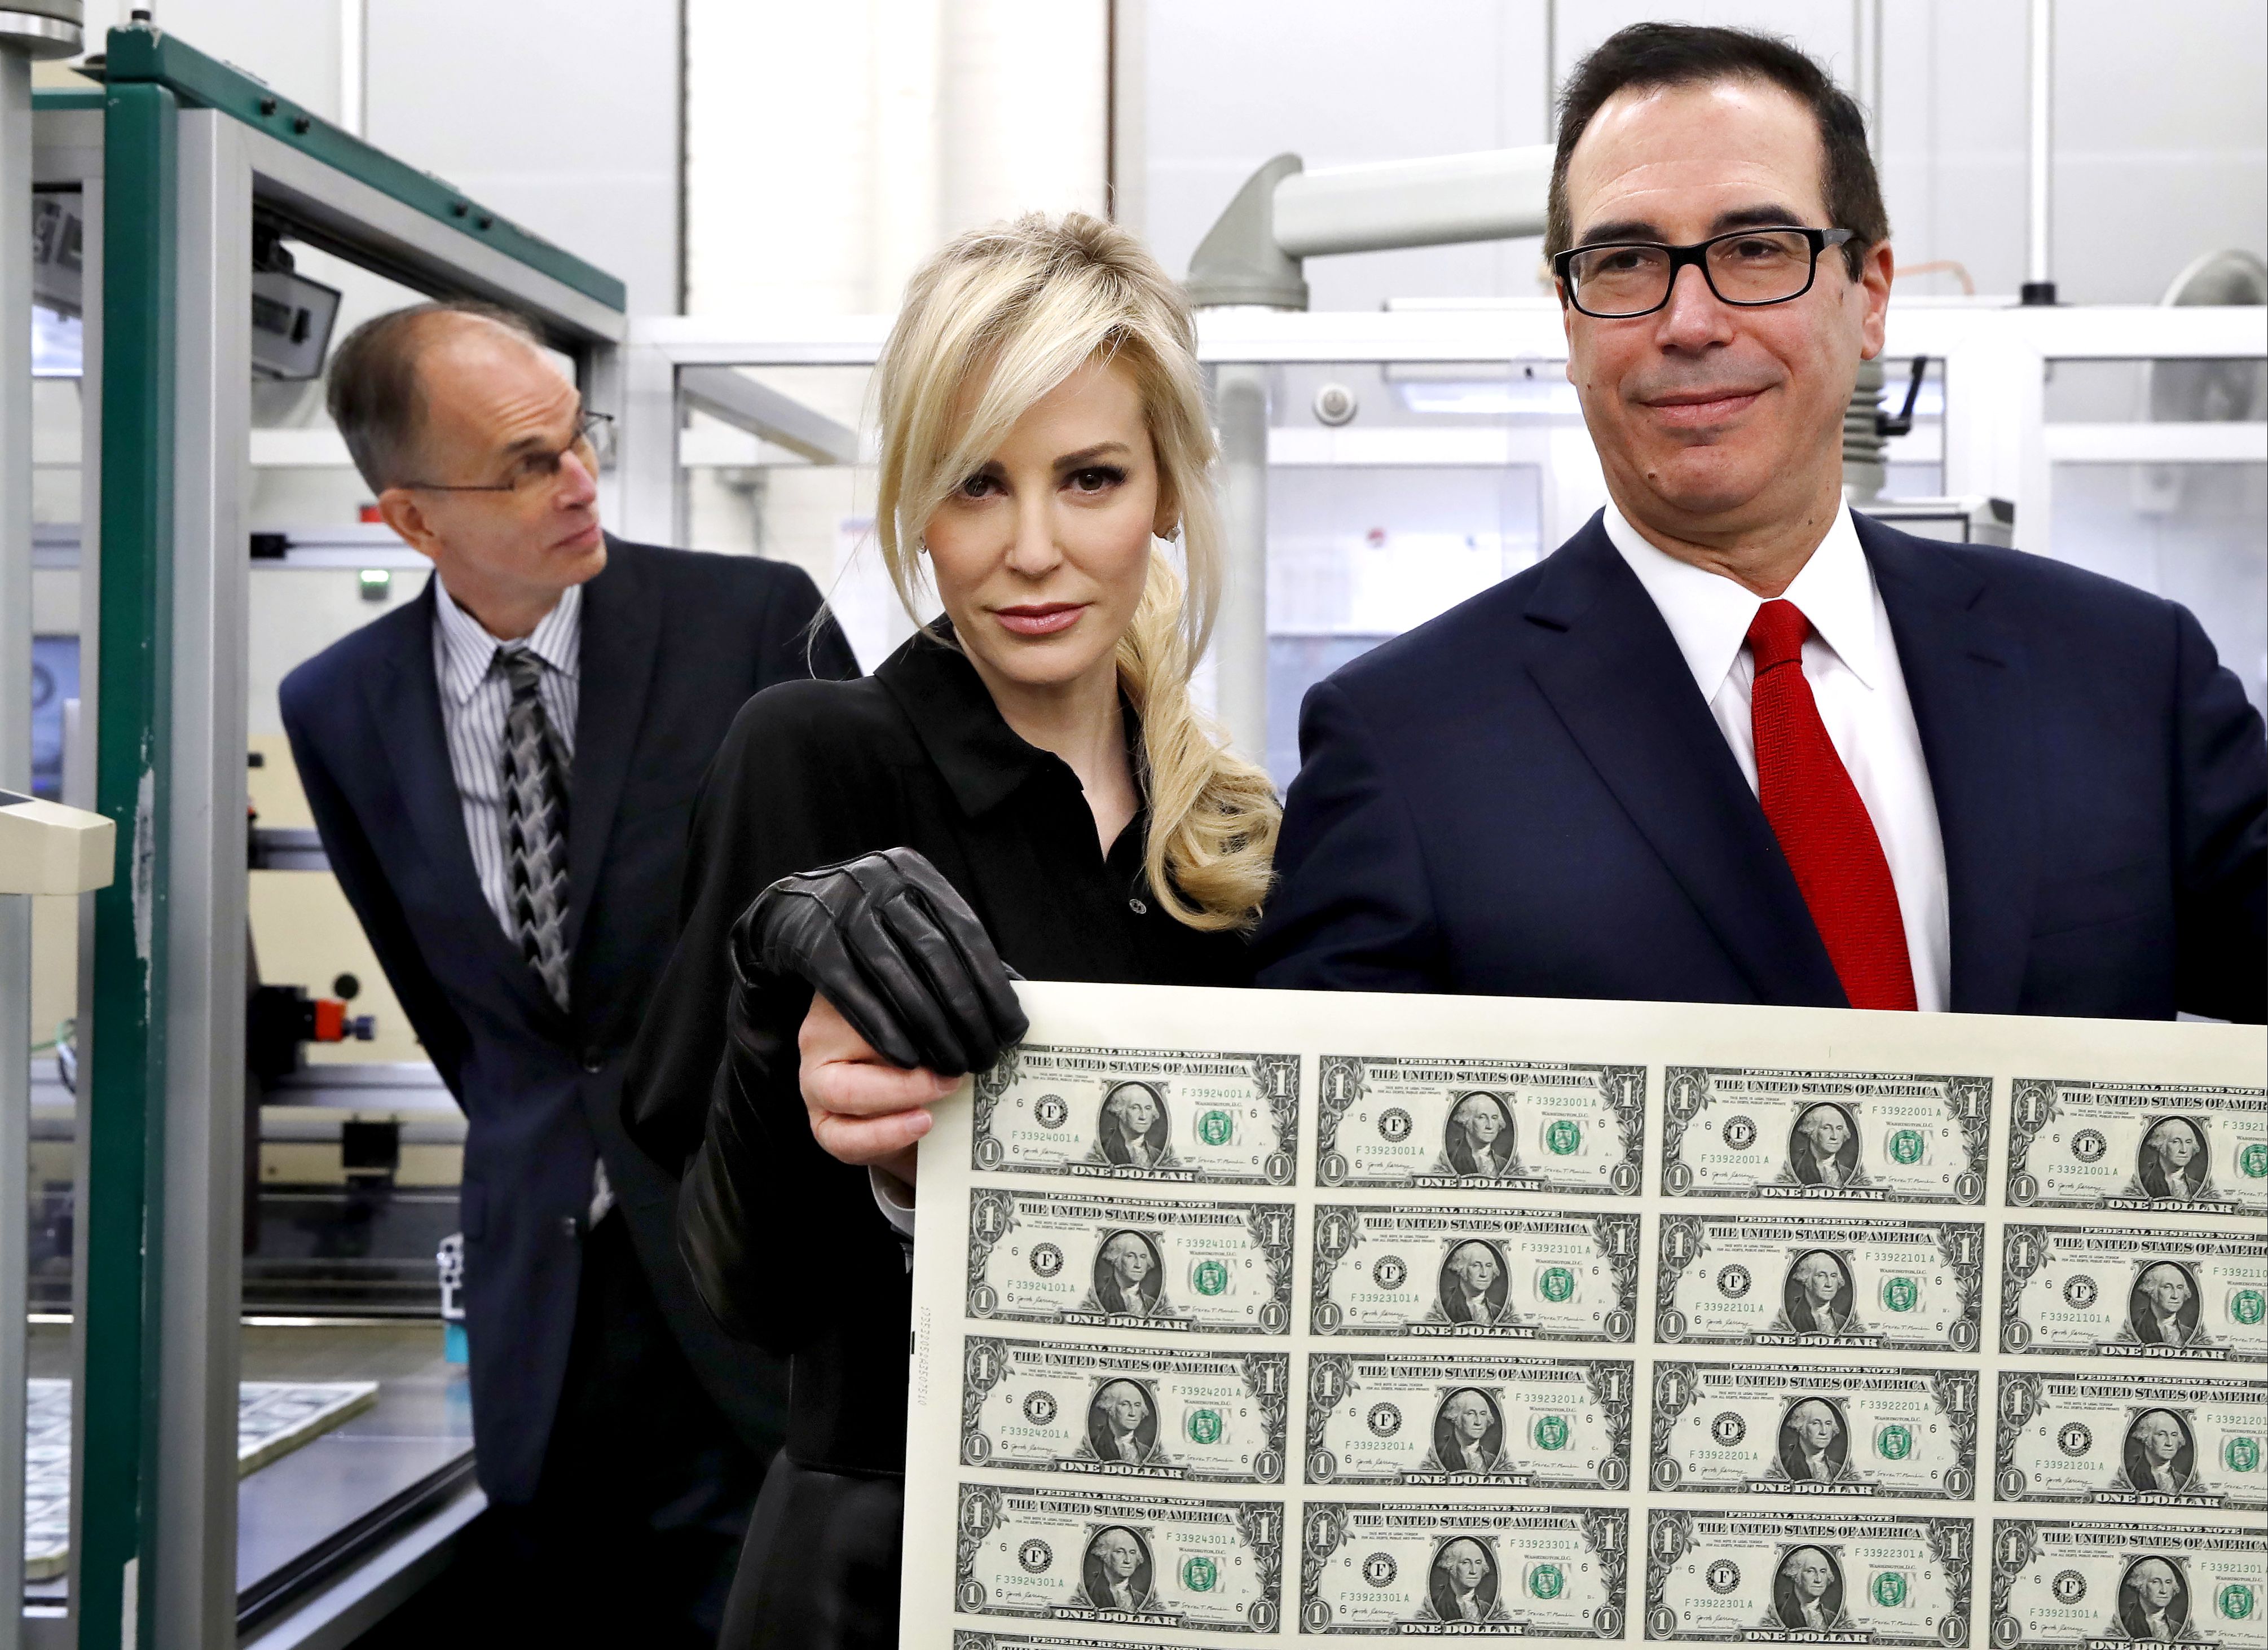 When Treasury Secretary Steven Mnuchin and his wife Louise Linton stopped by the Bureau of Engraving and Printing, they were photographed checking out $1 bills. The wire photos of the pair holding a sheet of dollars - the first currency notes bearing his and U.S. Treasurer Jovita Carranza's signatures - just made the parody too easy. 
                      It predictably and instantly became a flash point for online fun and comedian Andy Richter's joking tweet about it got 14,000 likes. (AP/REX/Shutterstock)